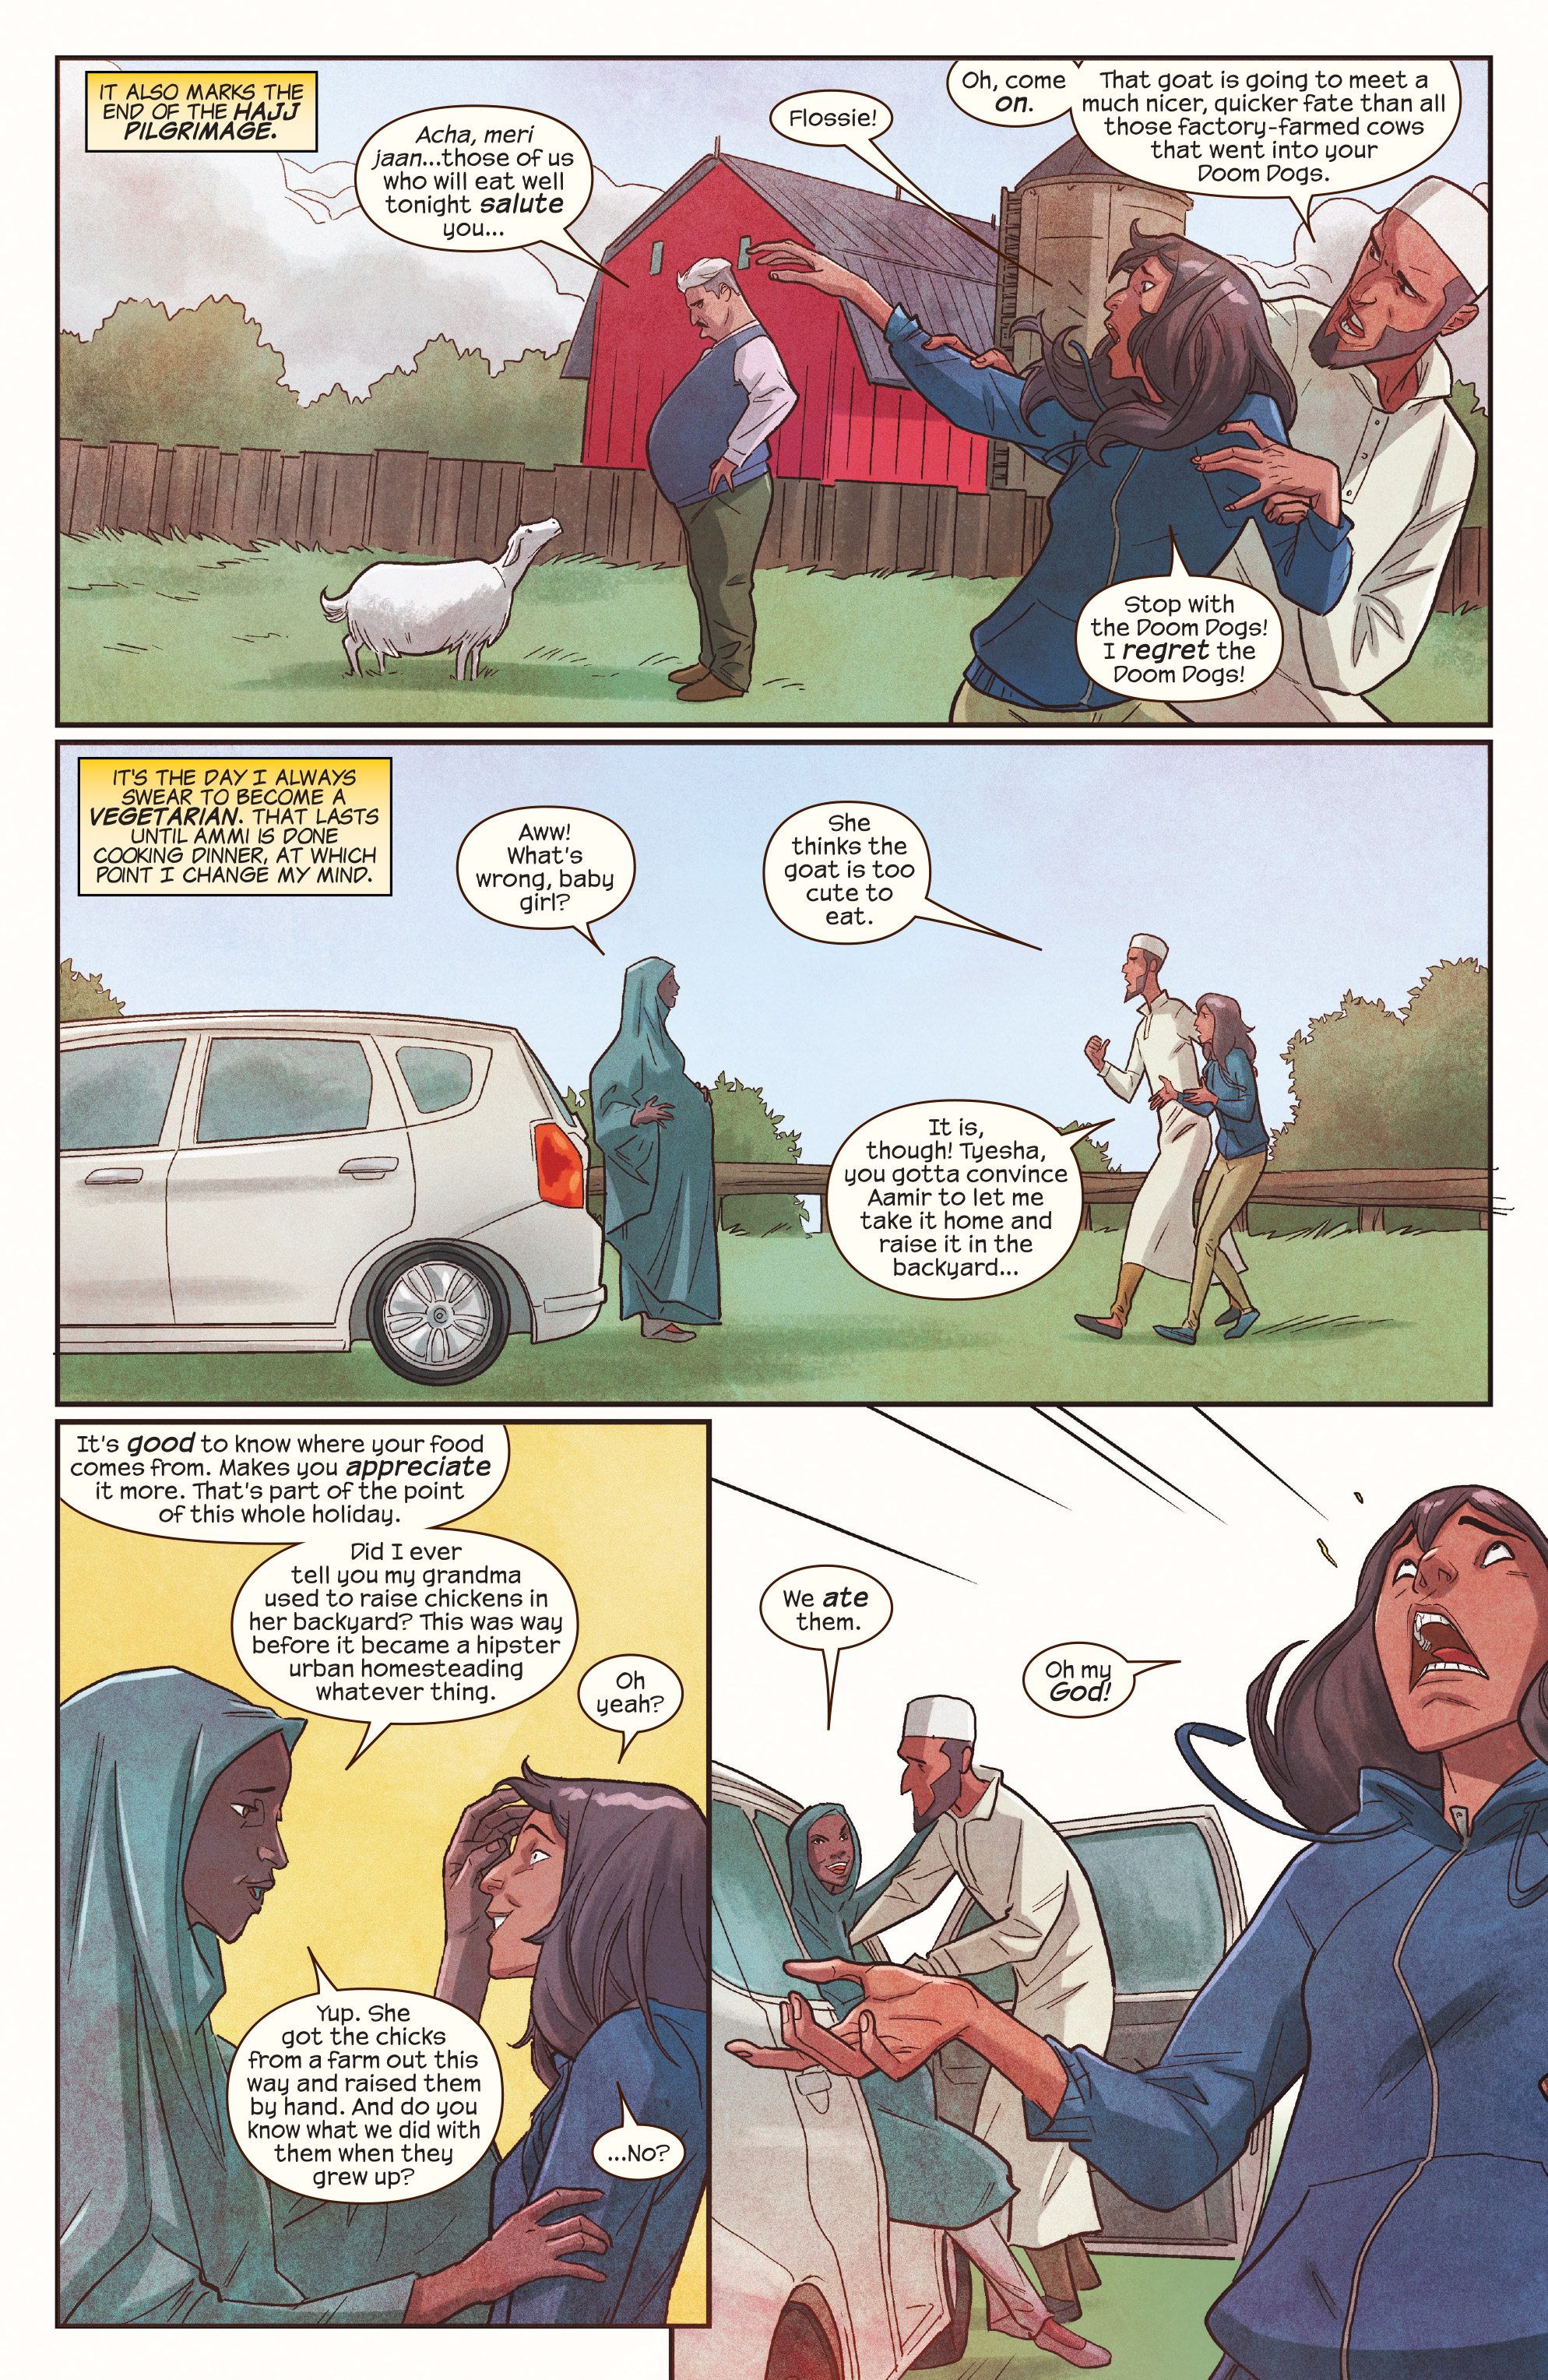 Ms. Marvel (2015-): Chapter 19 - Page 3